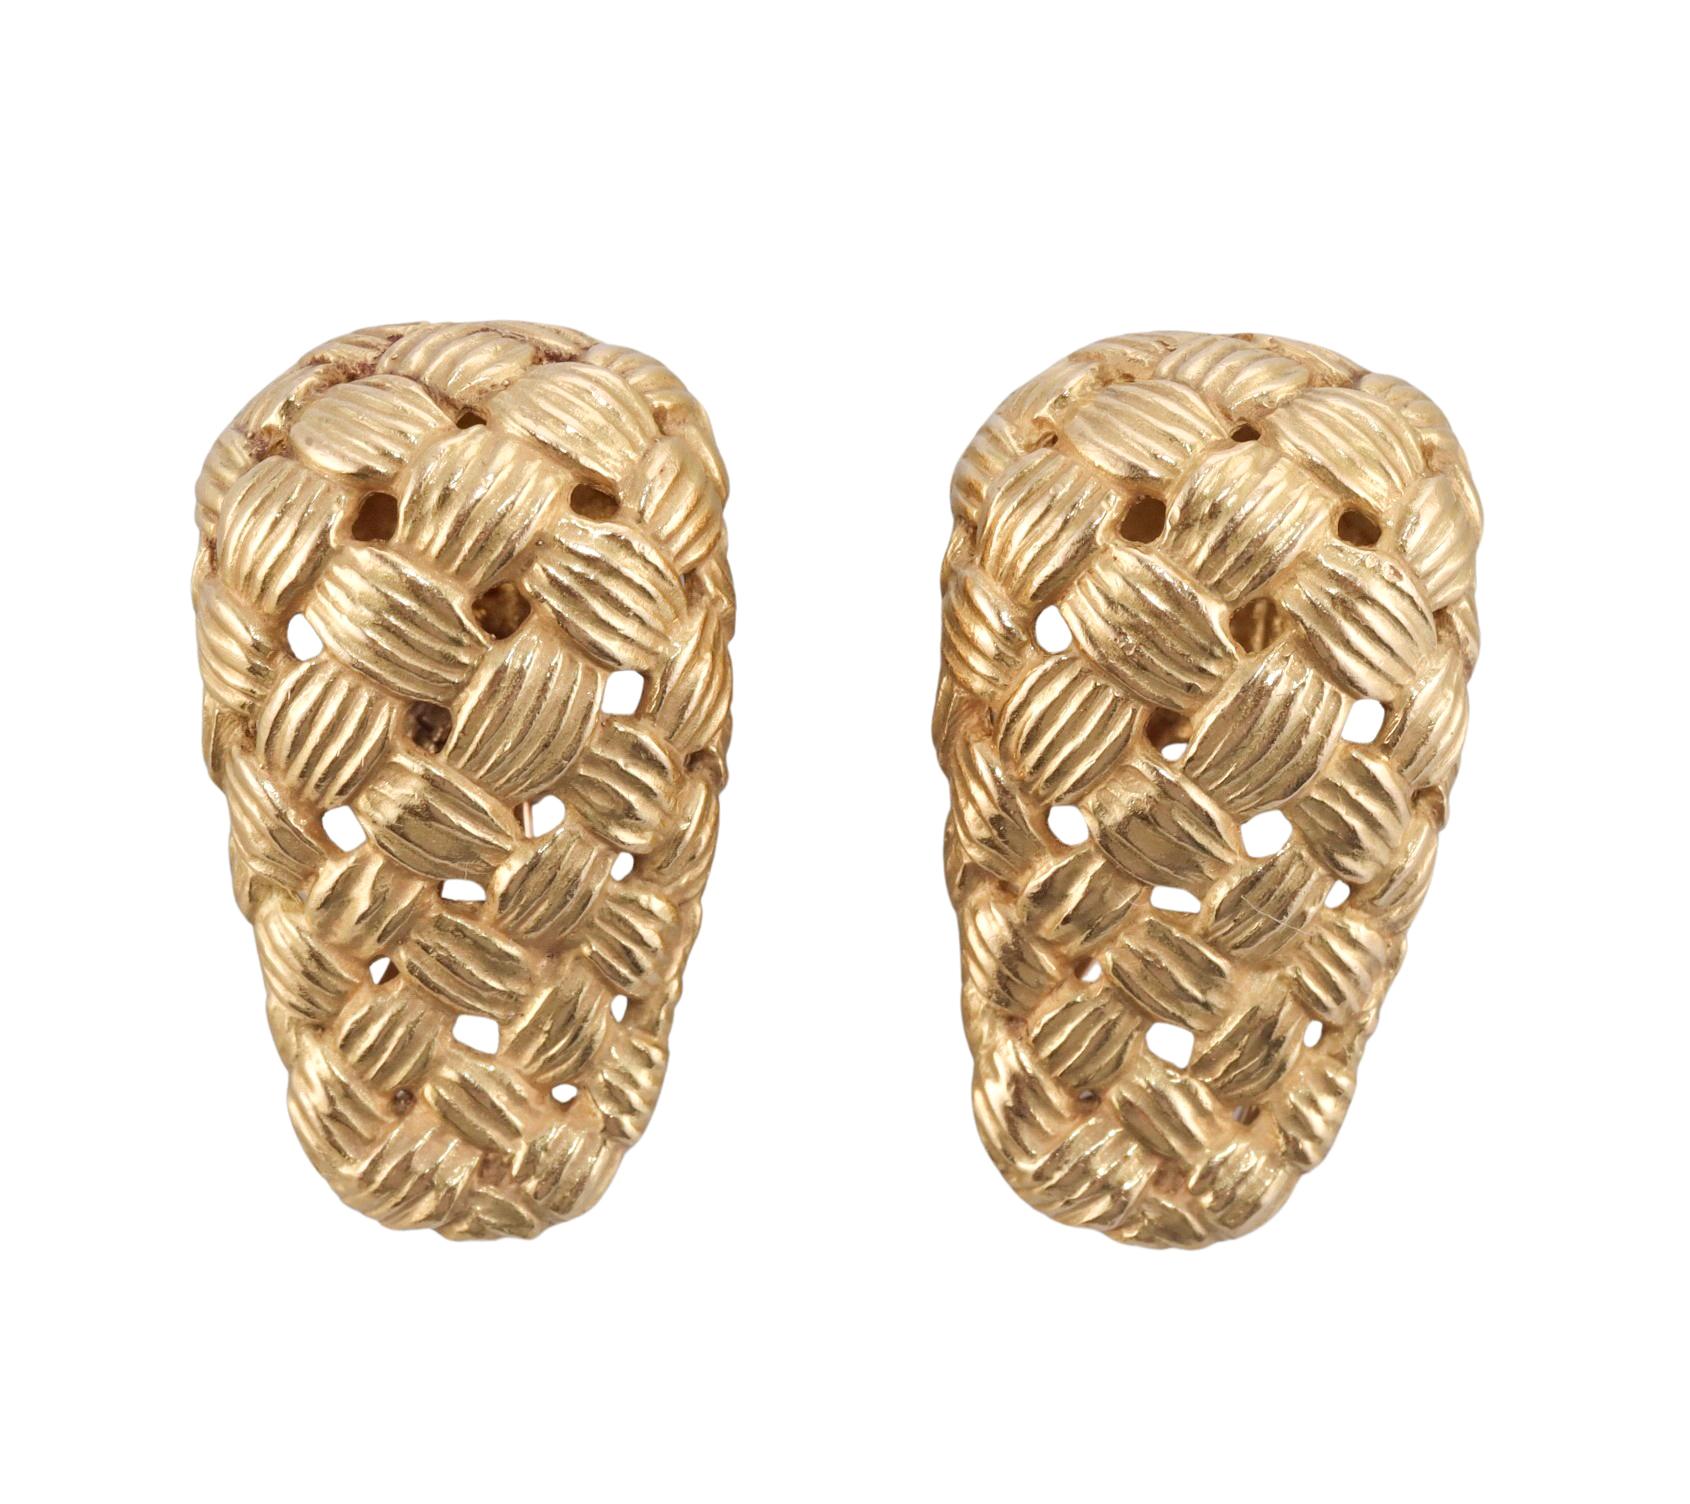 Angela Cummings 1987 Gold Basketweave Earrings In Excellent Condition For Sale In New York, NY